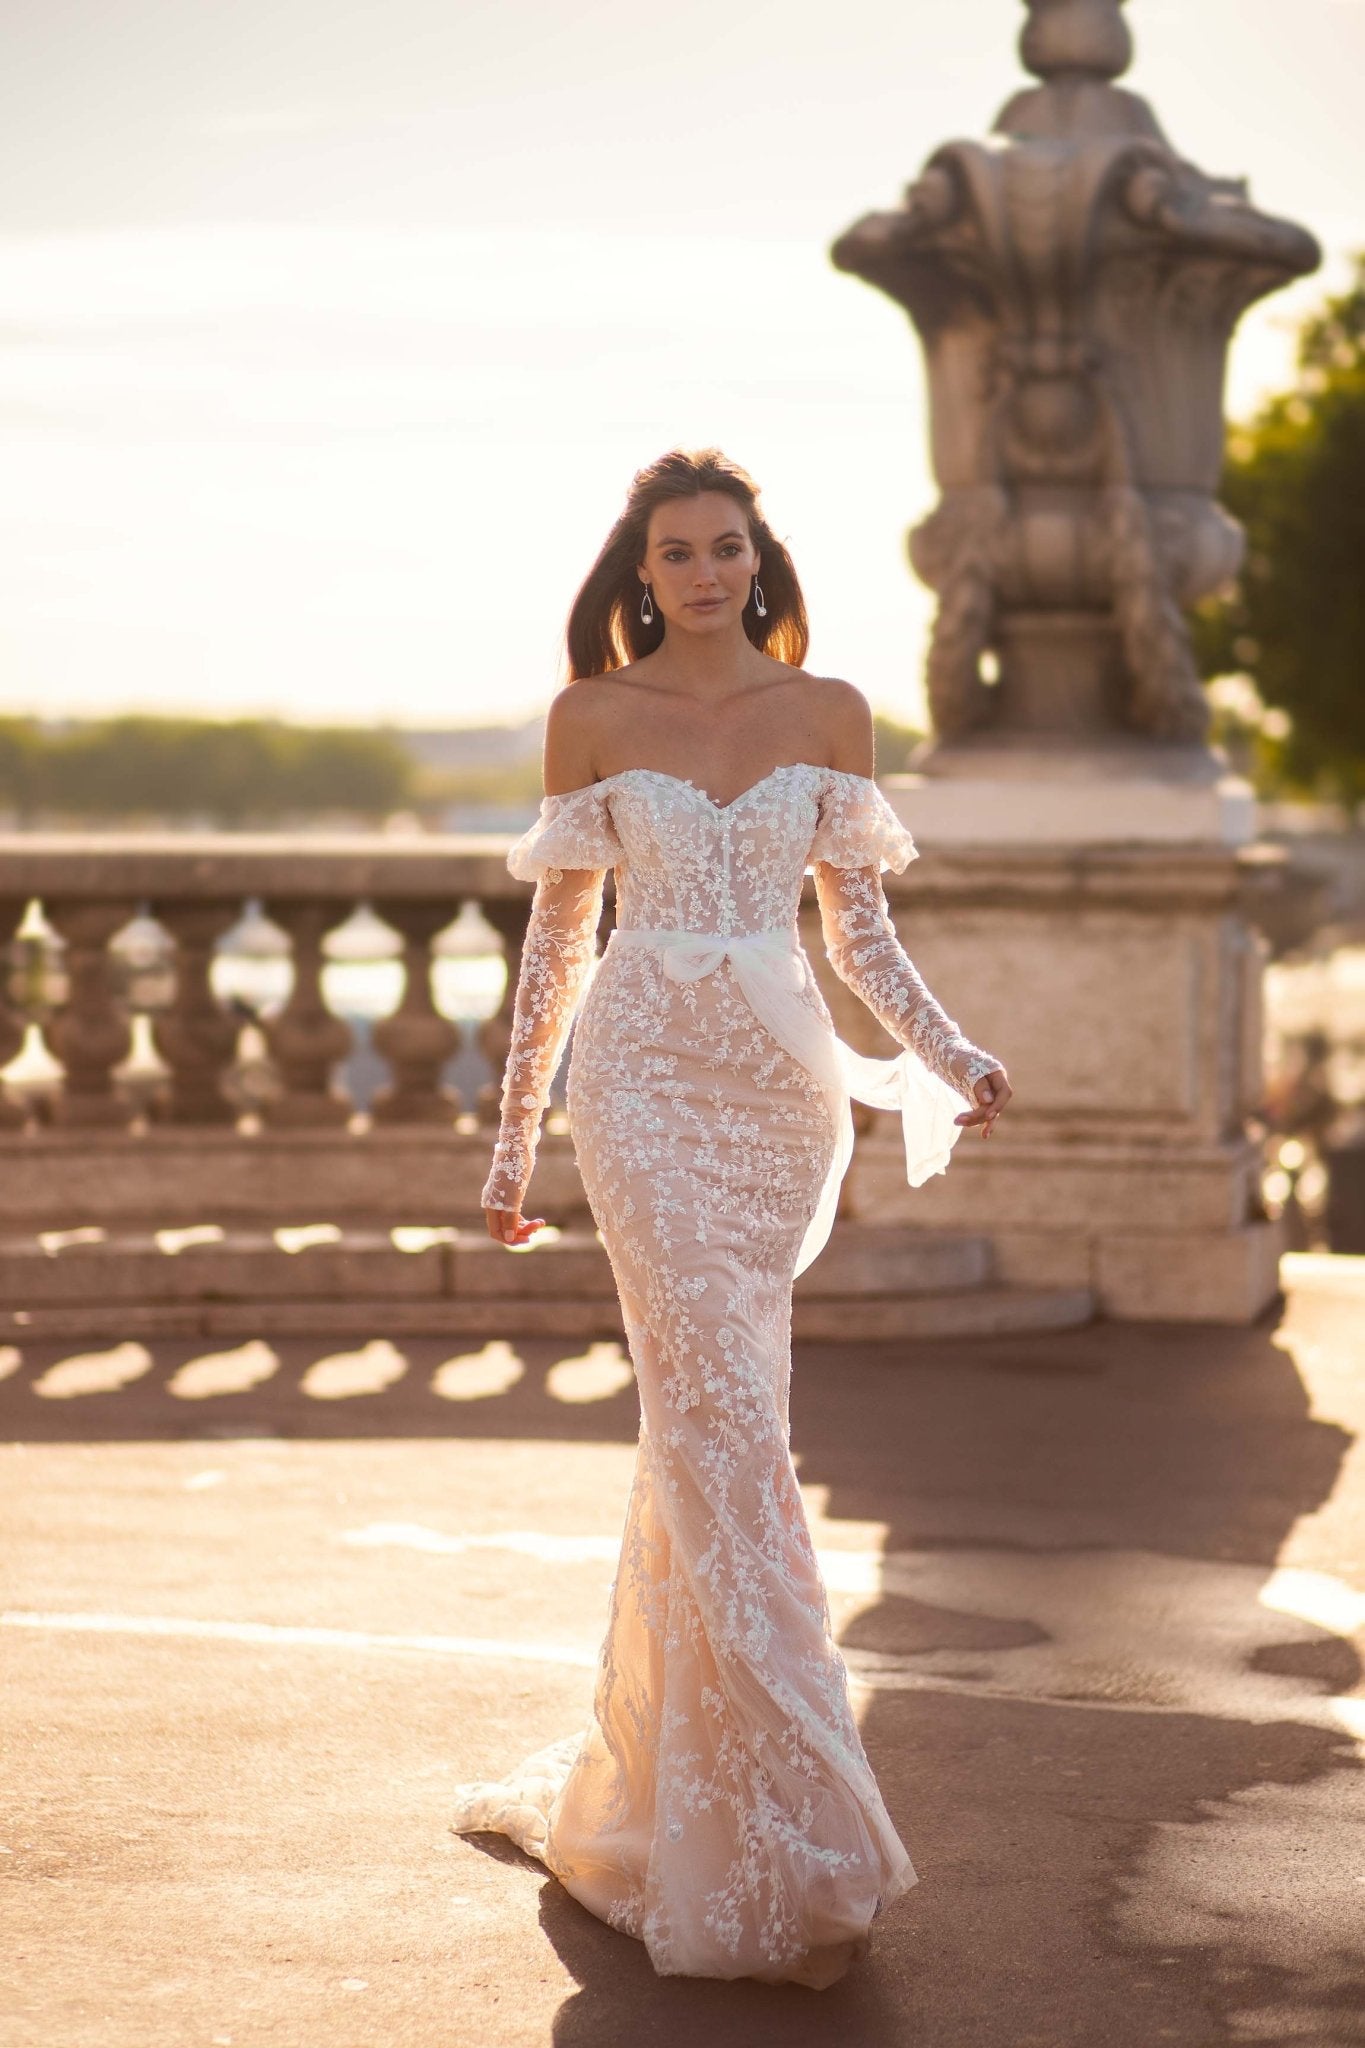 Champagne Wedding Dress with Sleeves and Lace Appliqués, Featuring 3D Floral Design, Long Chapel Train, and Delicate Tulle Plus Size - WonderlandByLilian